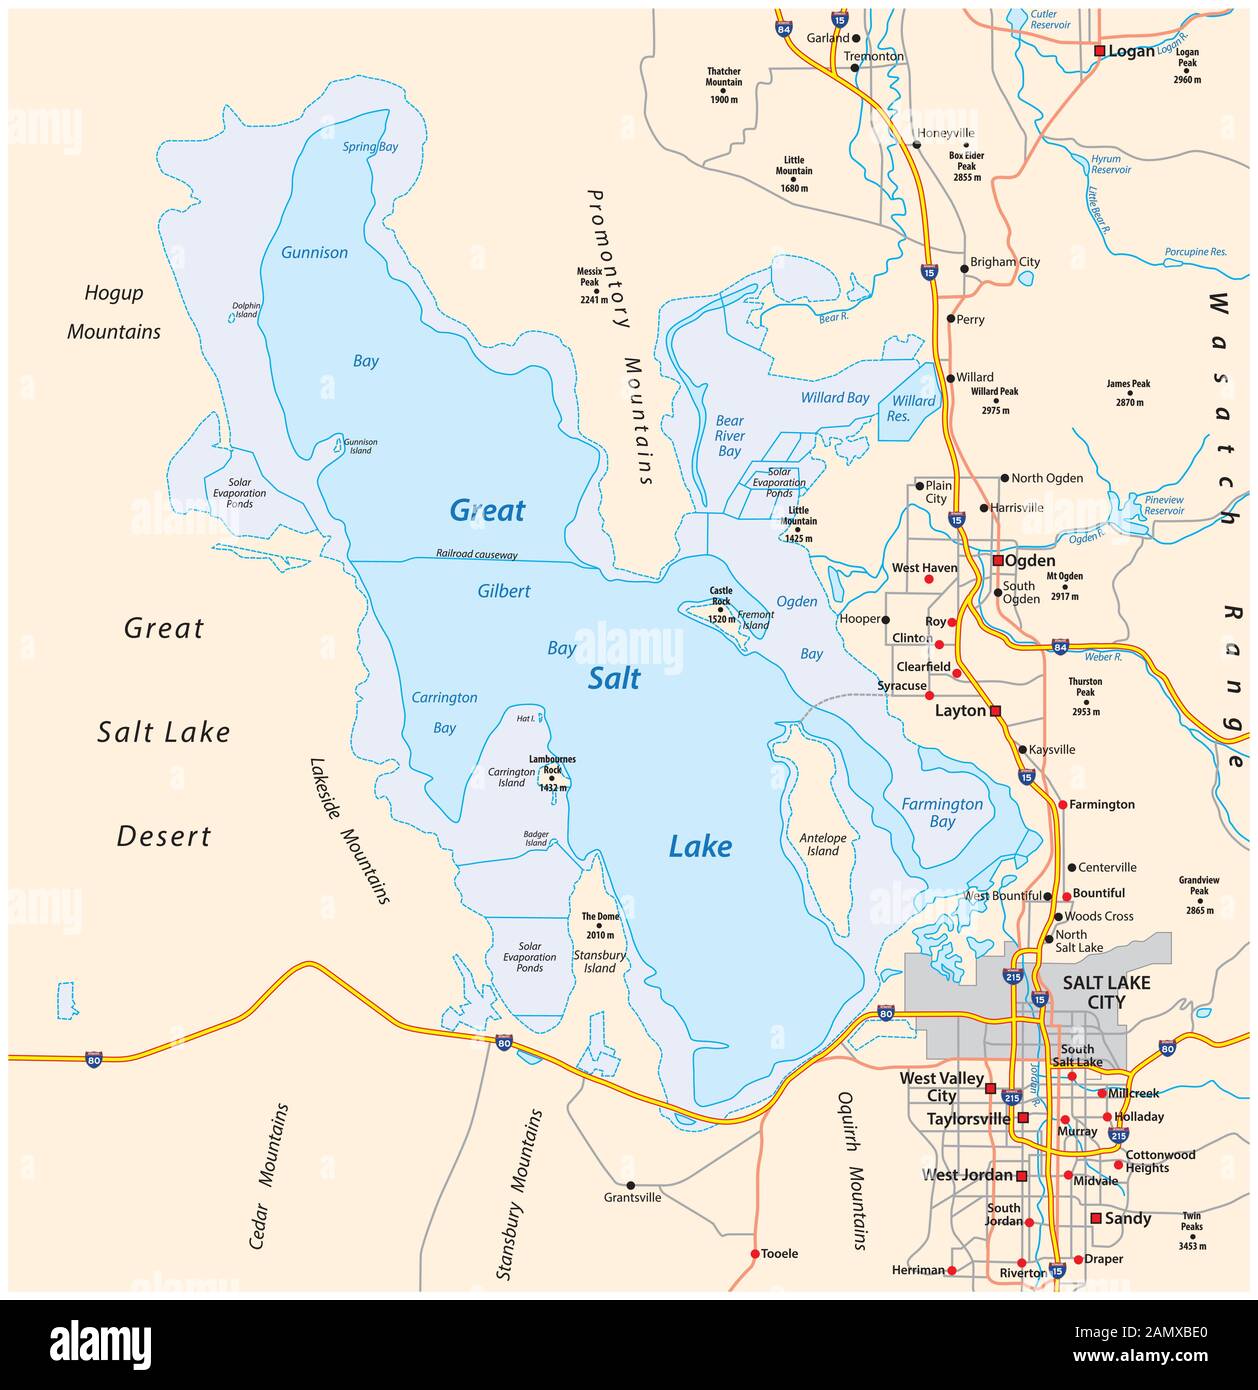 Map Of The Great Salt Lake And Salt Lake City In The State Of Utah